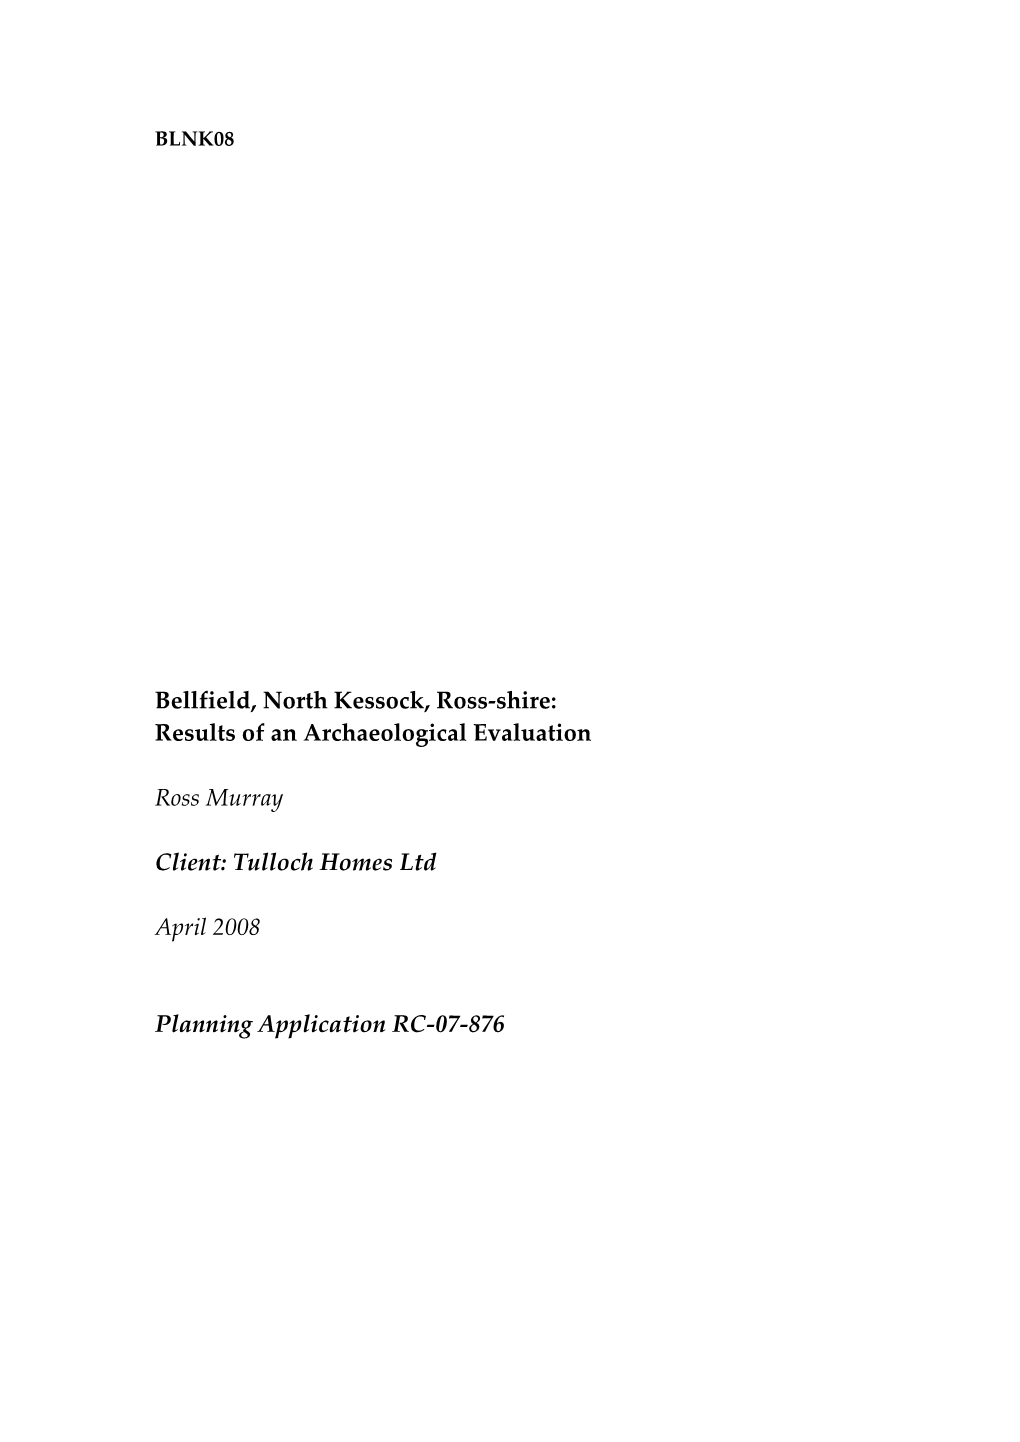 Bellfield, North Kessock, Ross-Shire: Results of an Archaeological